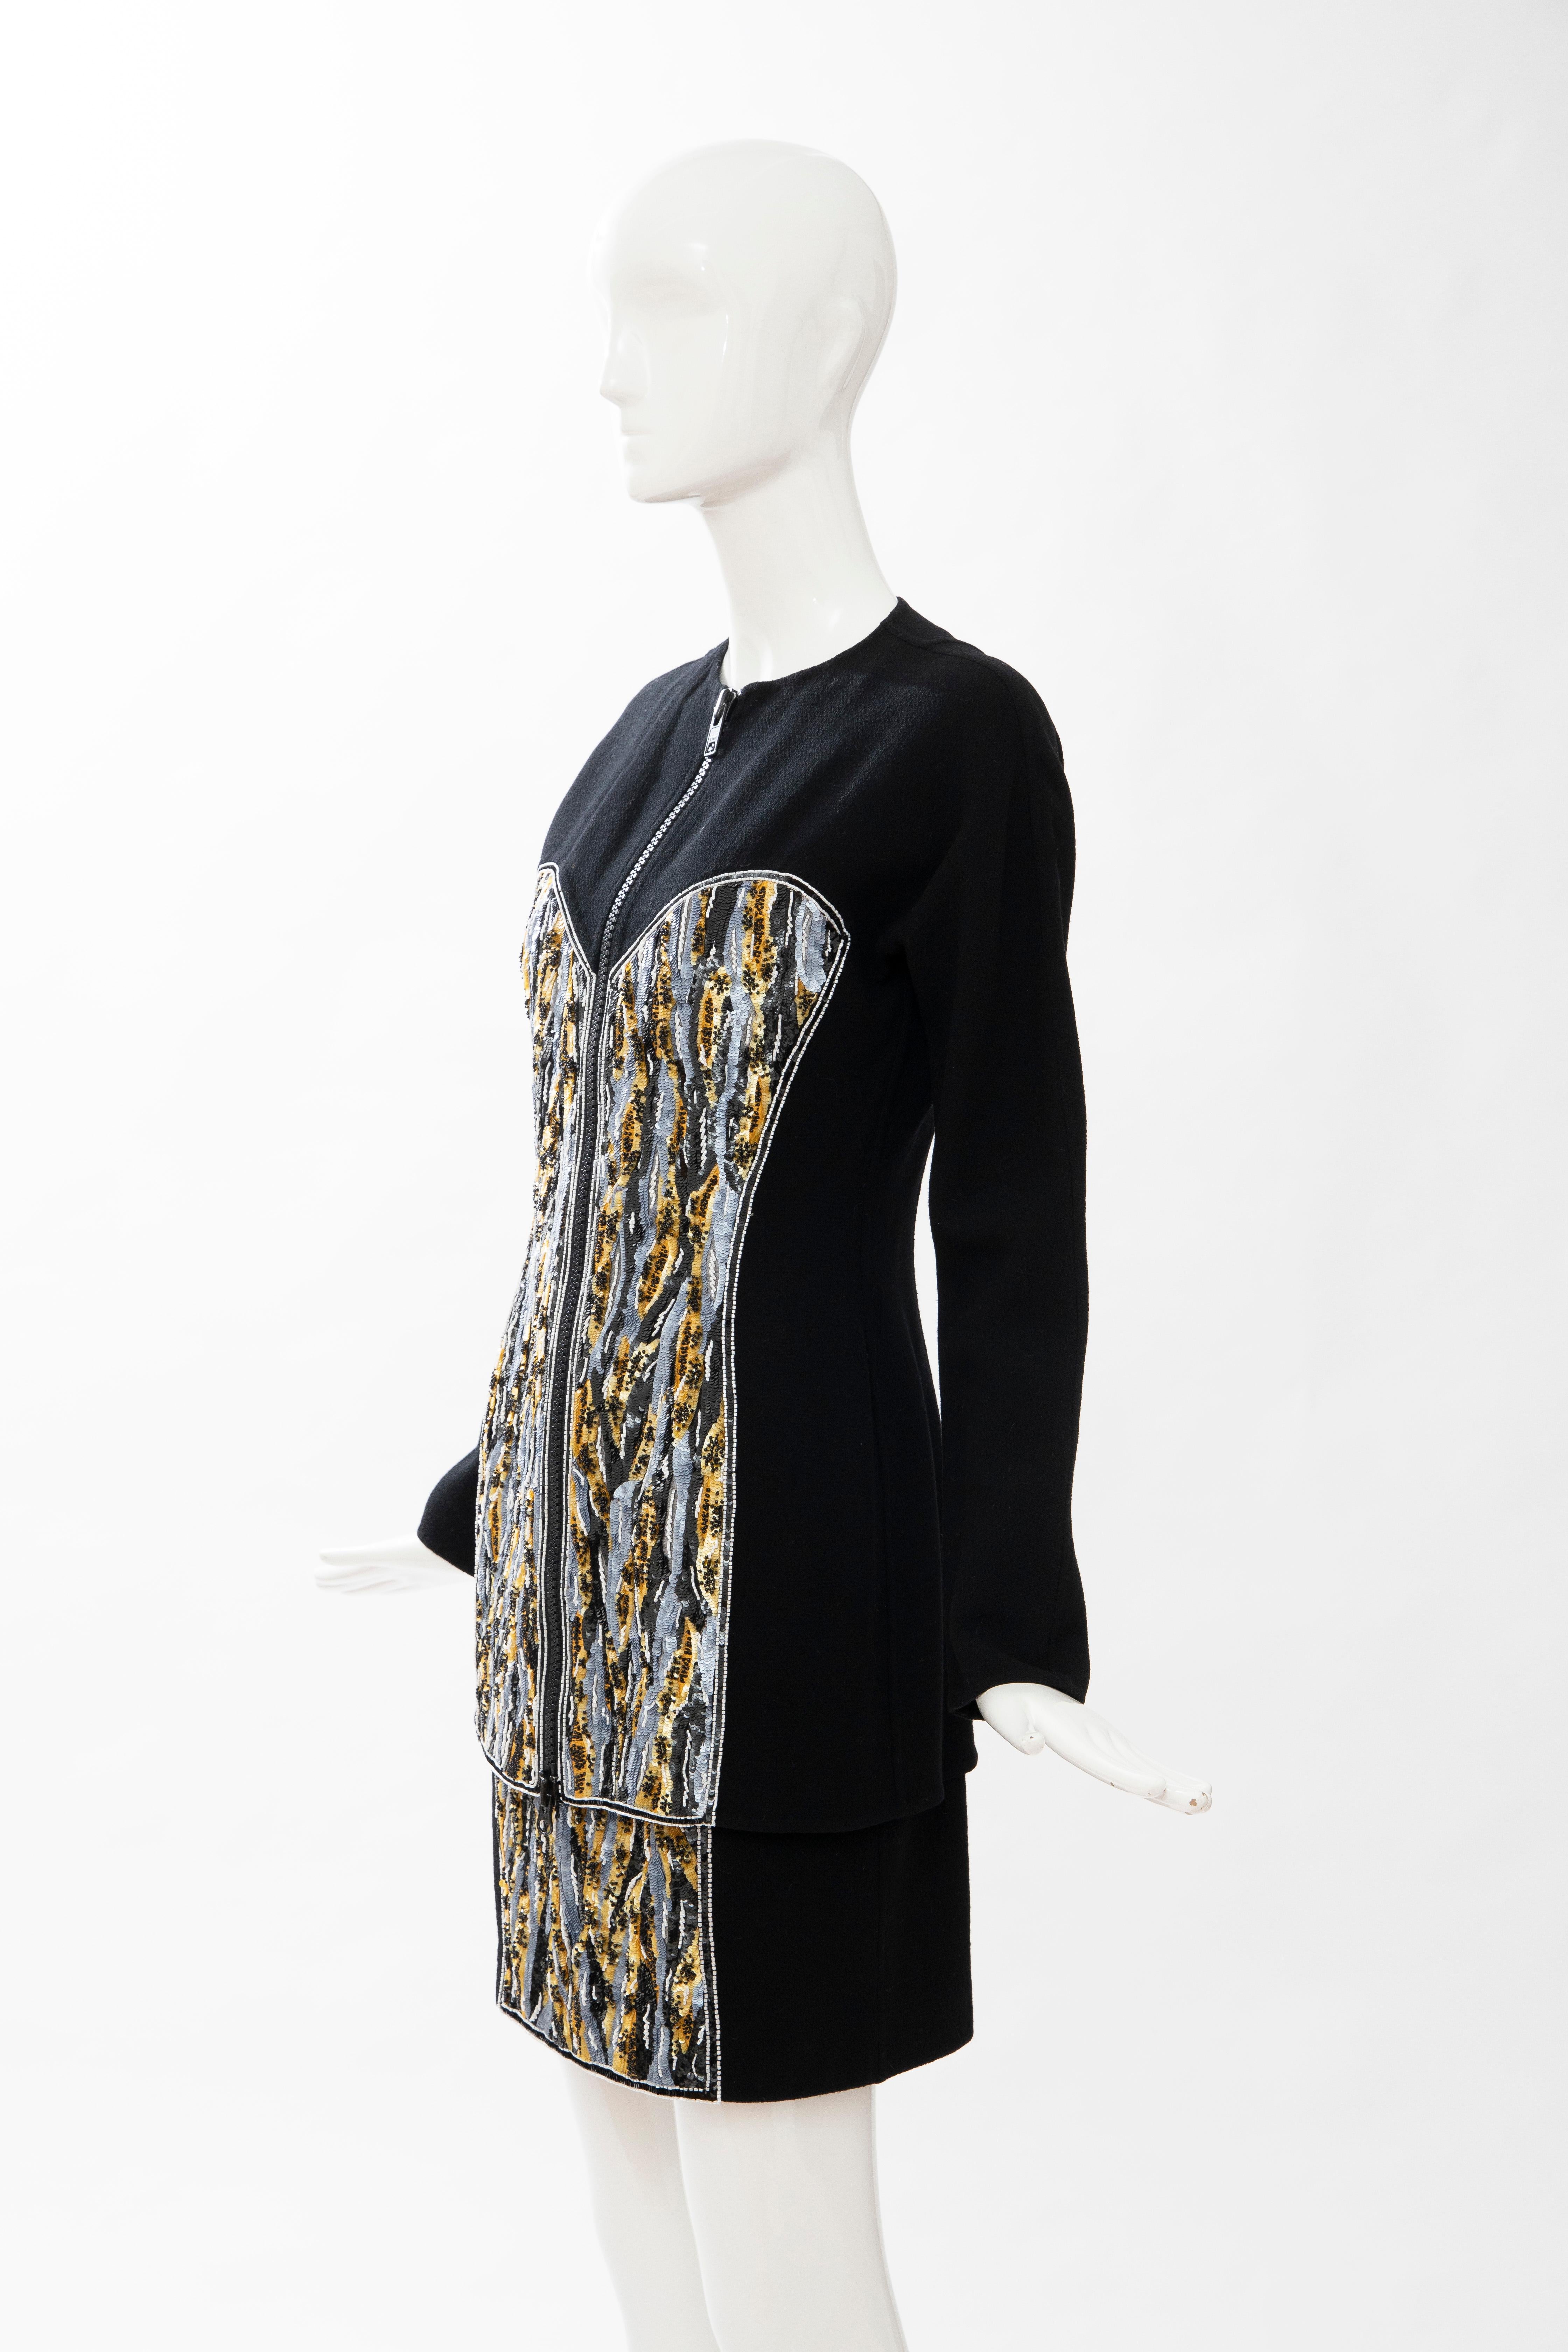 Geoffrey Beene Black Wool Crepe Embroidered Sequins Dress Ensemble, Circa 1990's For Sale 9